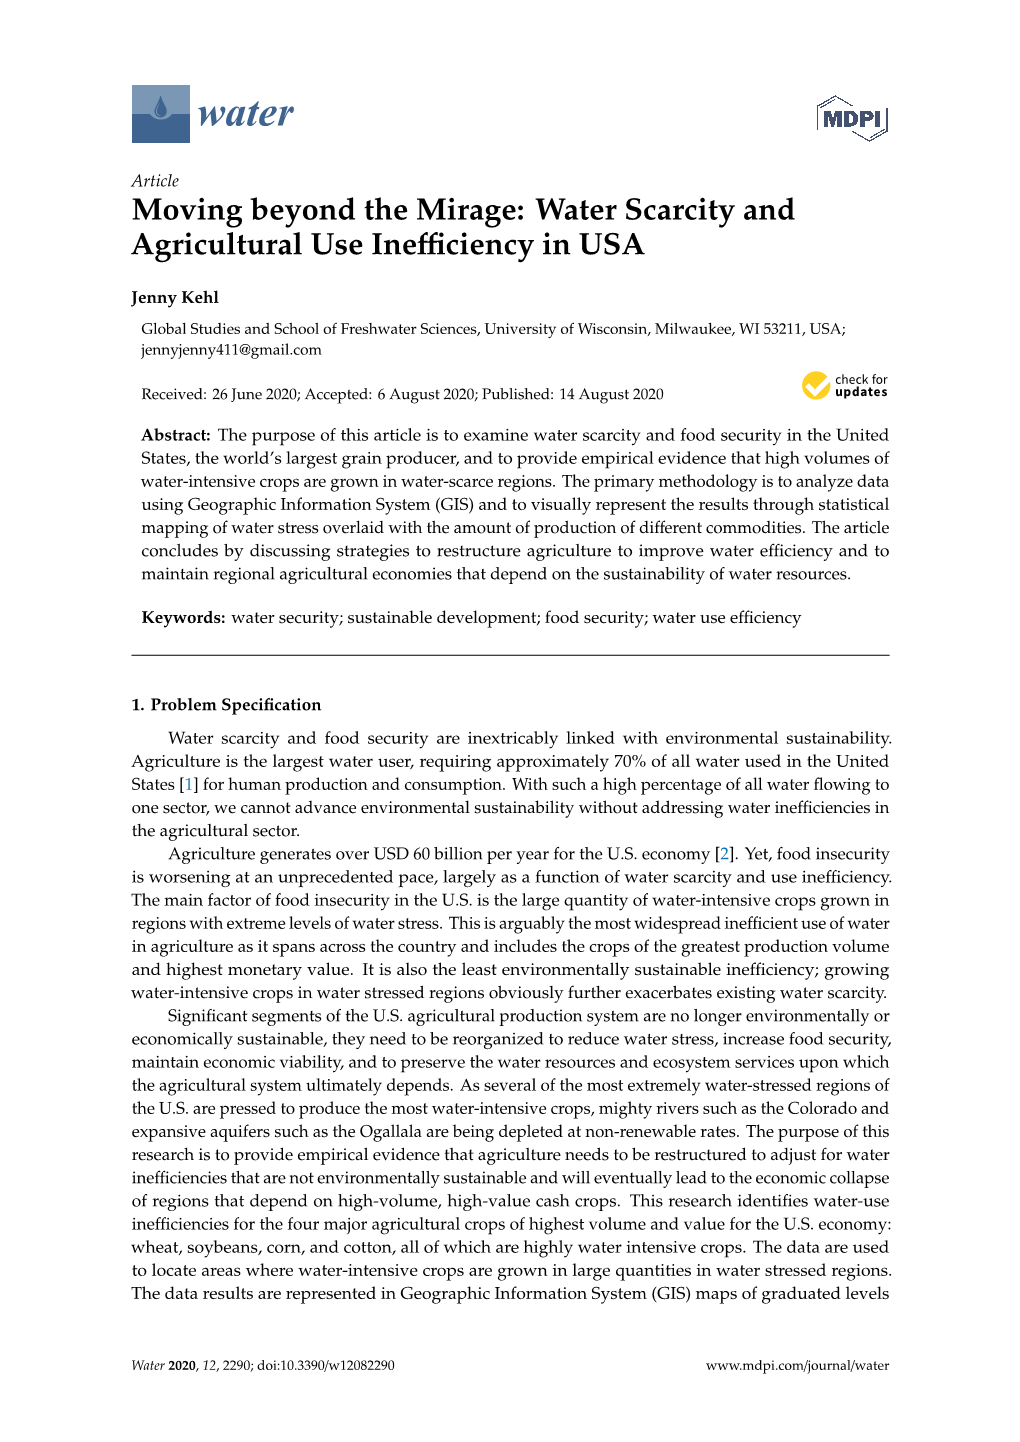 Water Scarcity and Agricultural Use Inefficiency In